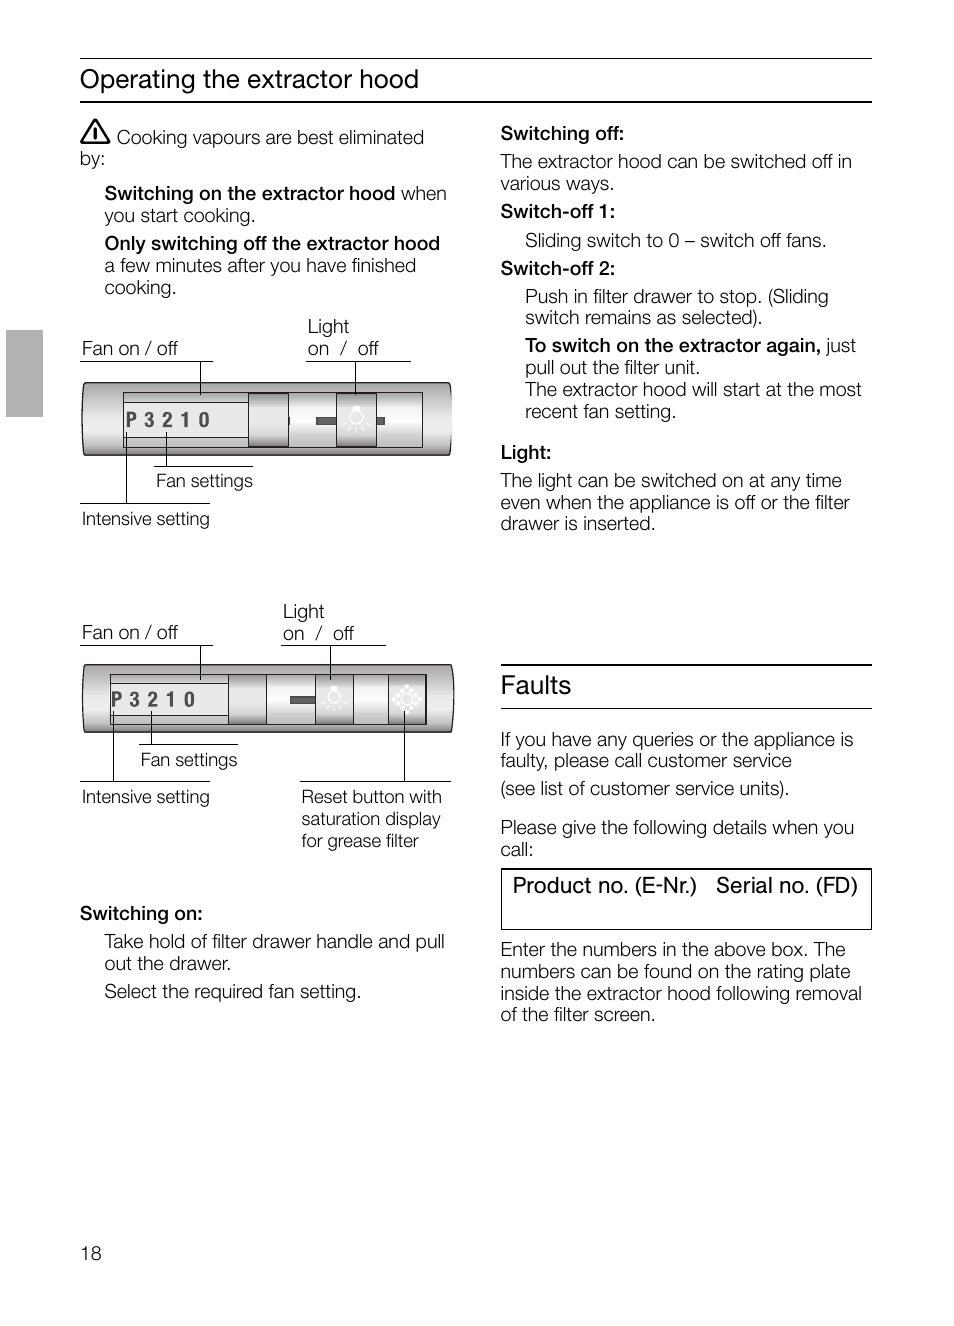 Operating the extractor hood, Faults | Siemens LI44630 User Manual | Page  18 / 100